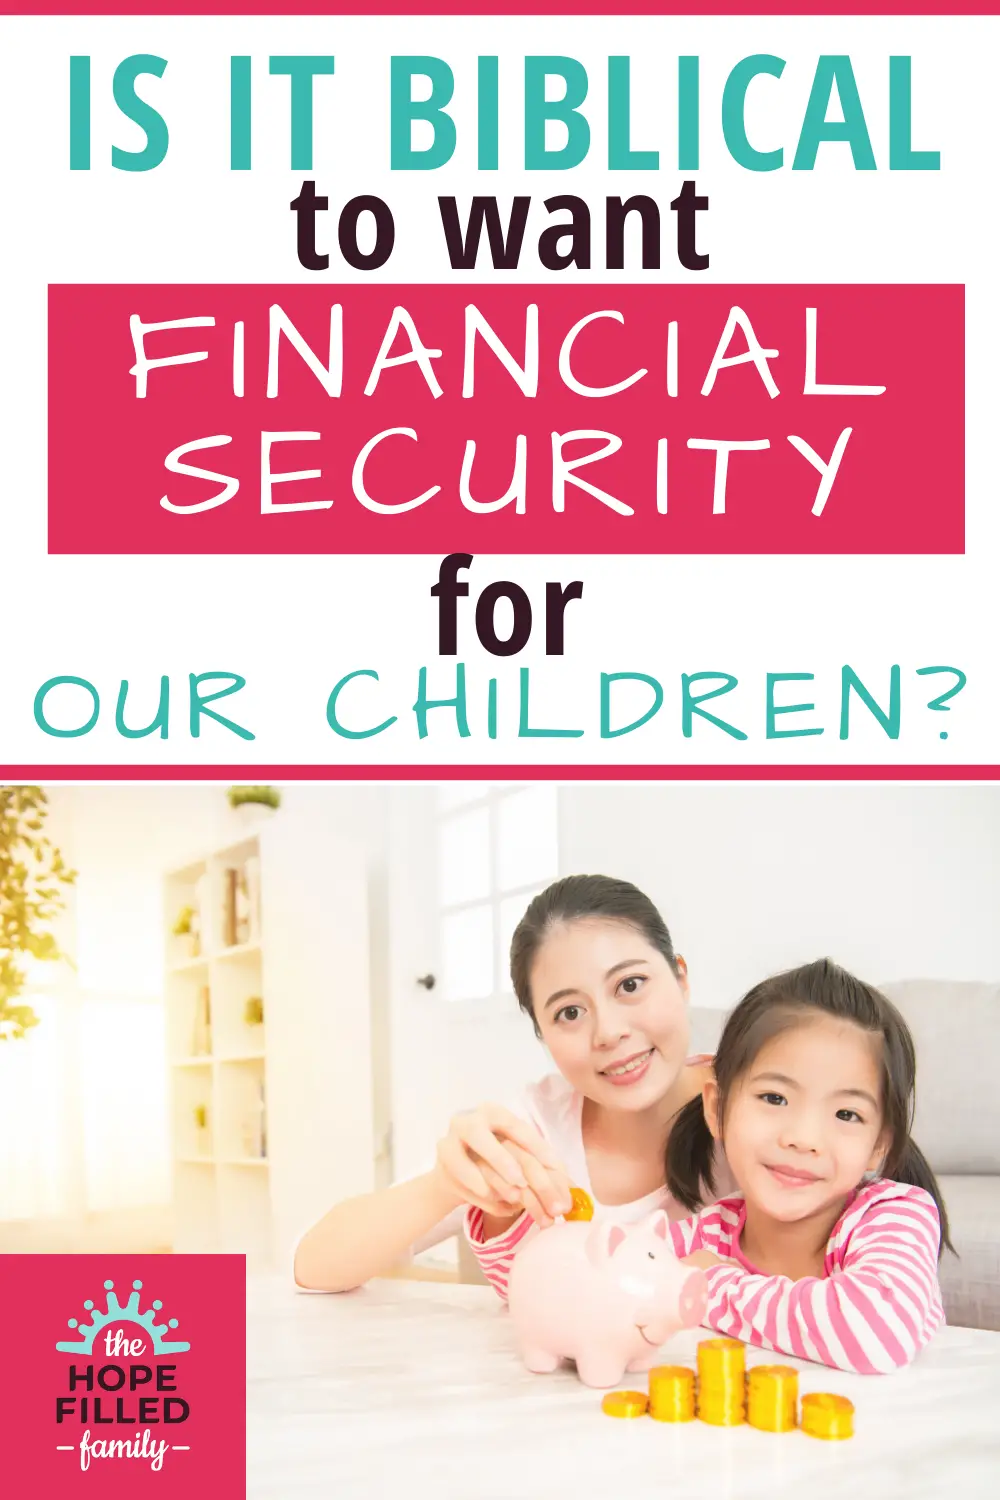 It's natural to want financial security for our children - but is it Biblical?